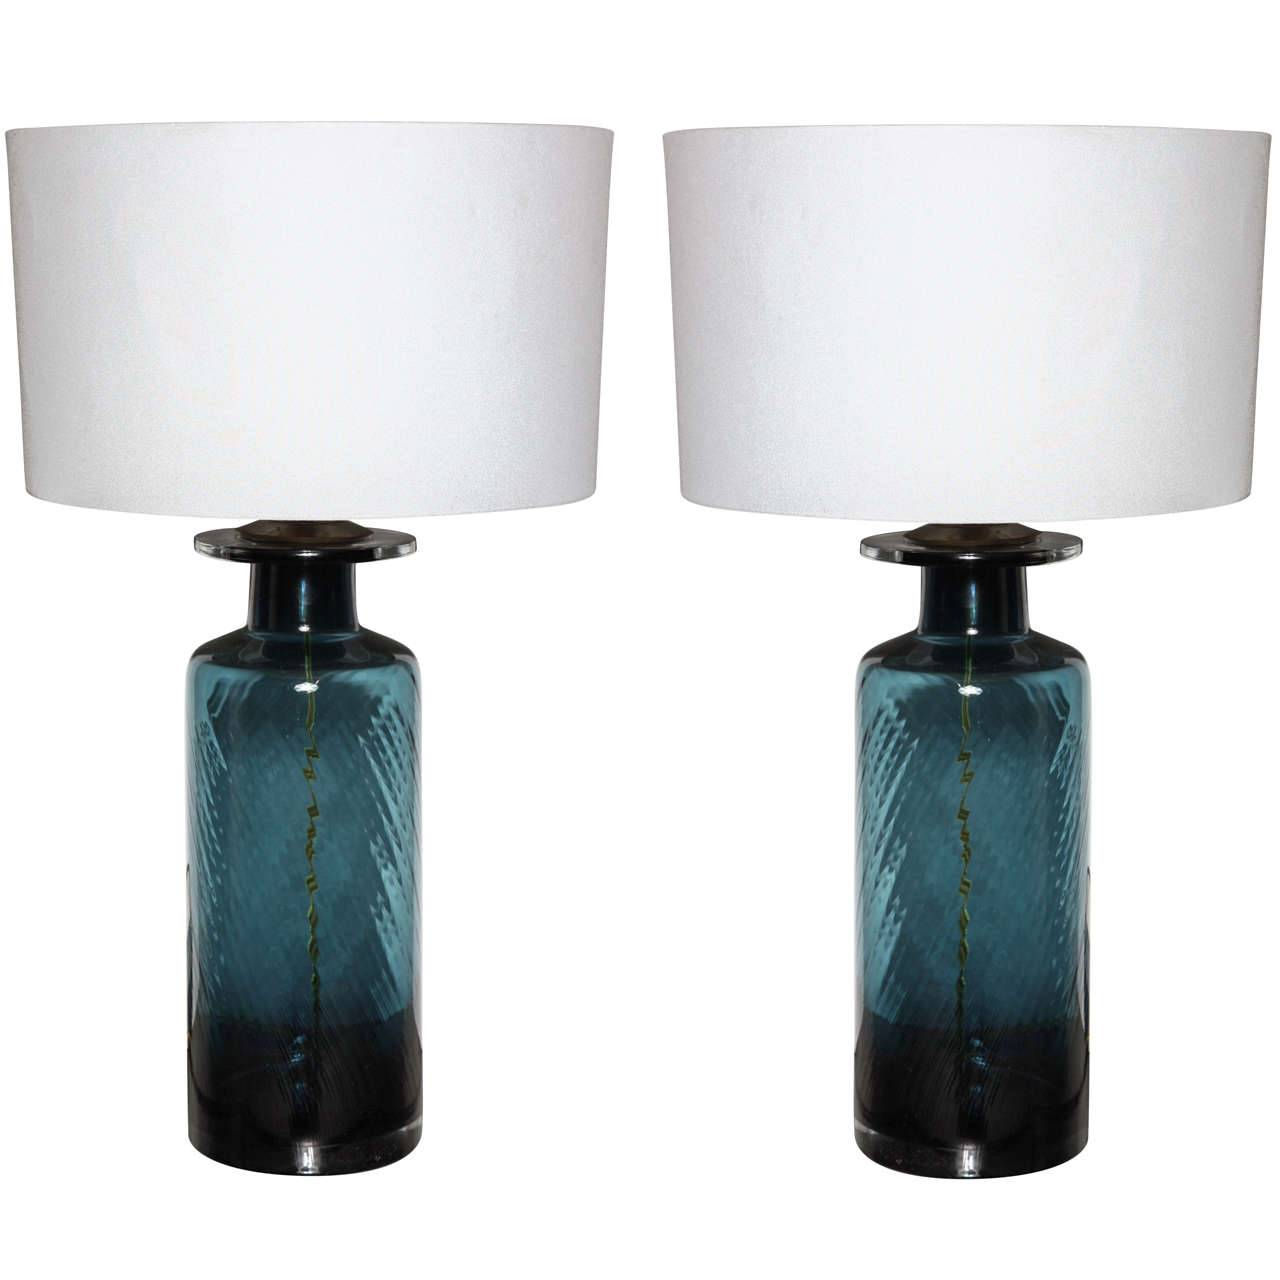 Pair of Teal Blue Murano Glass Table Lamps